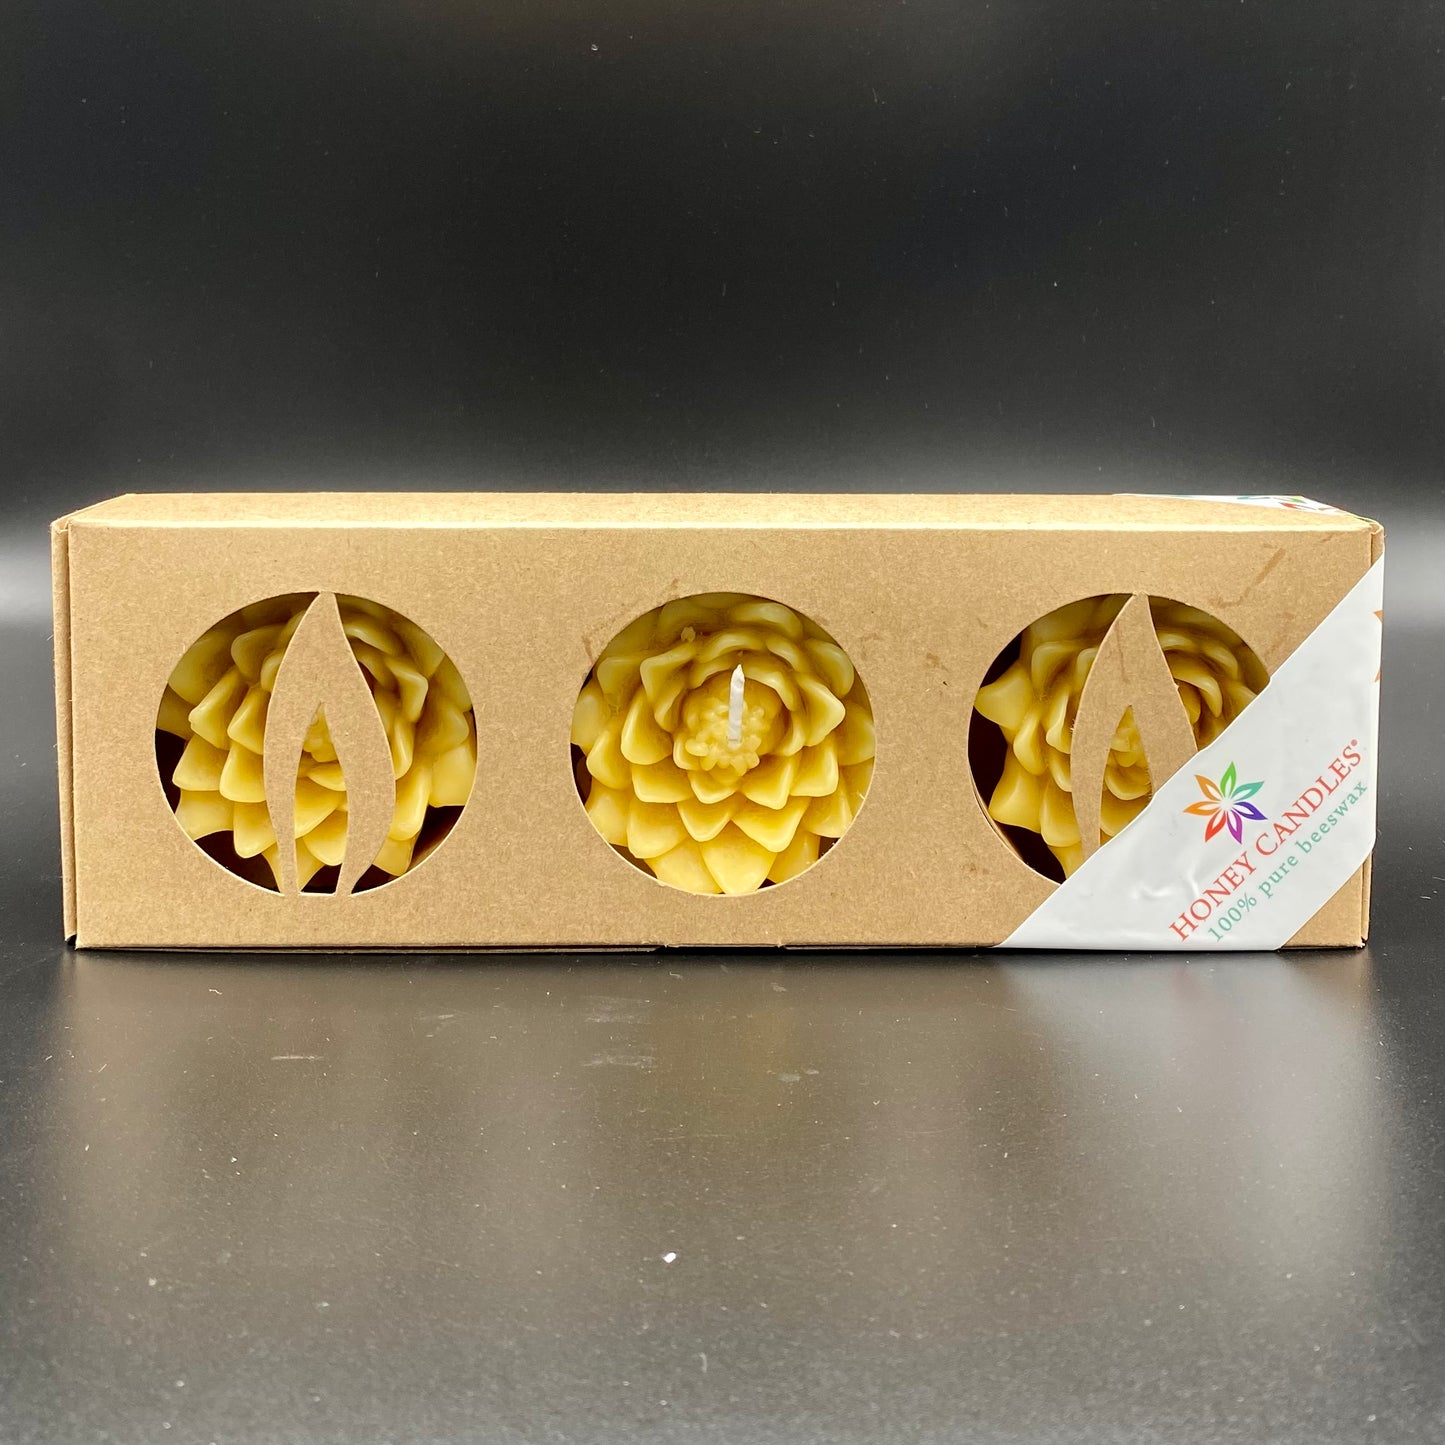 3" Floating Lotus Blossom Beeswax Candles